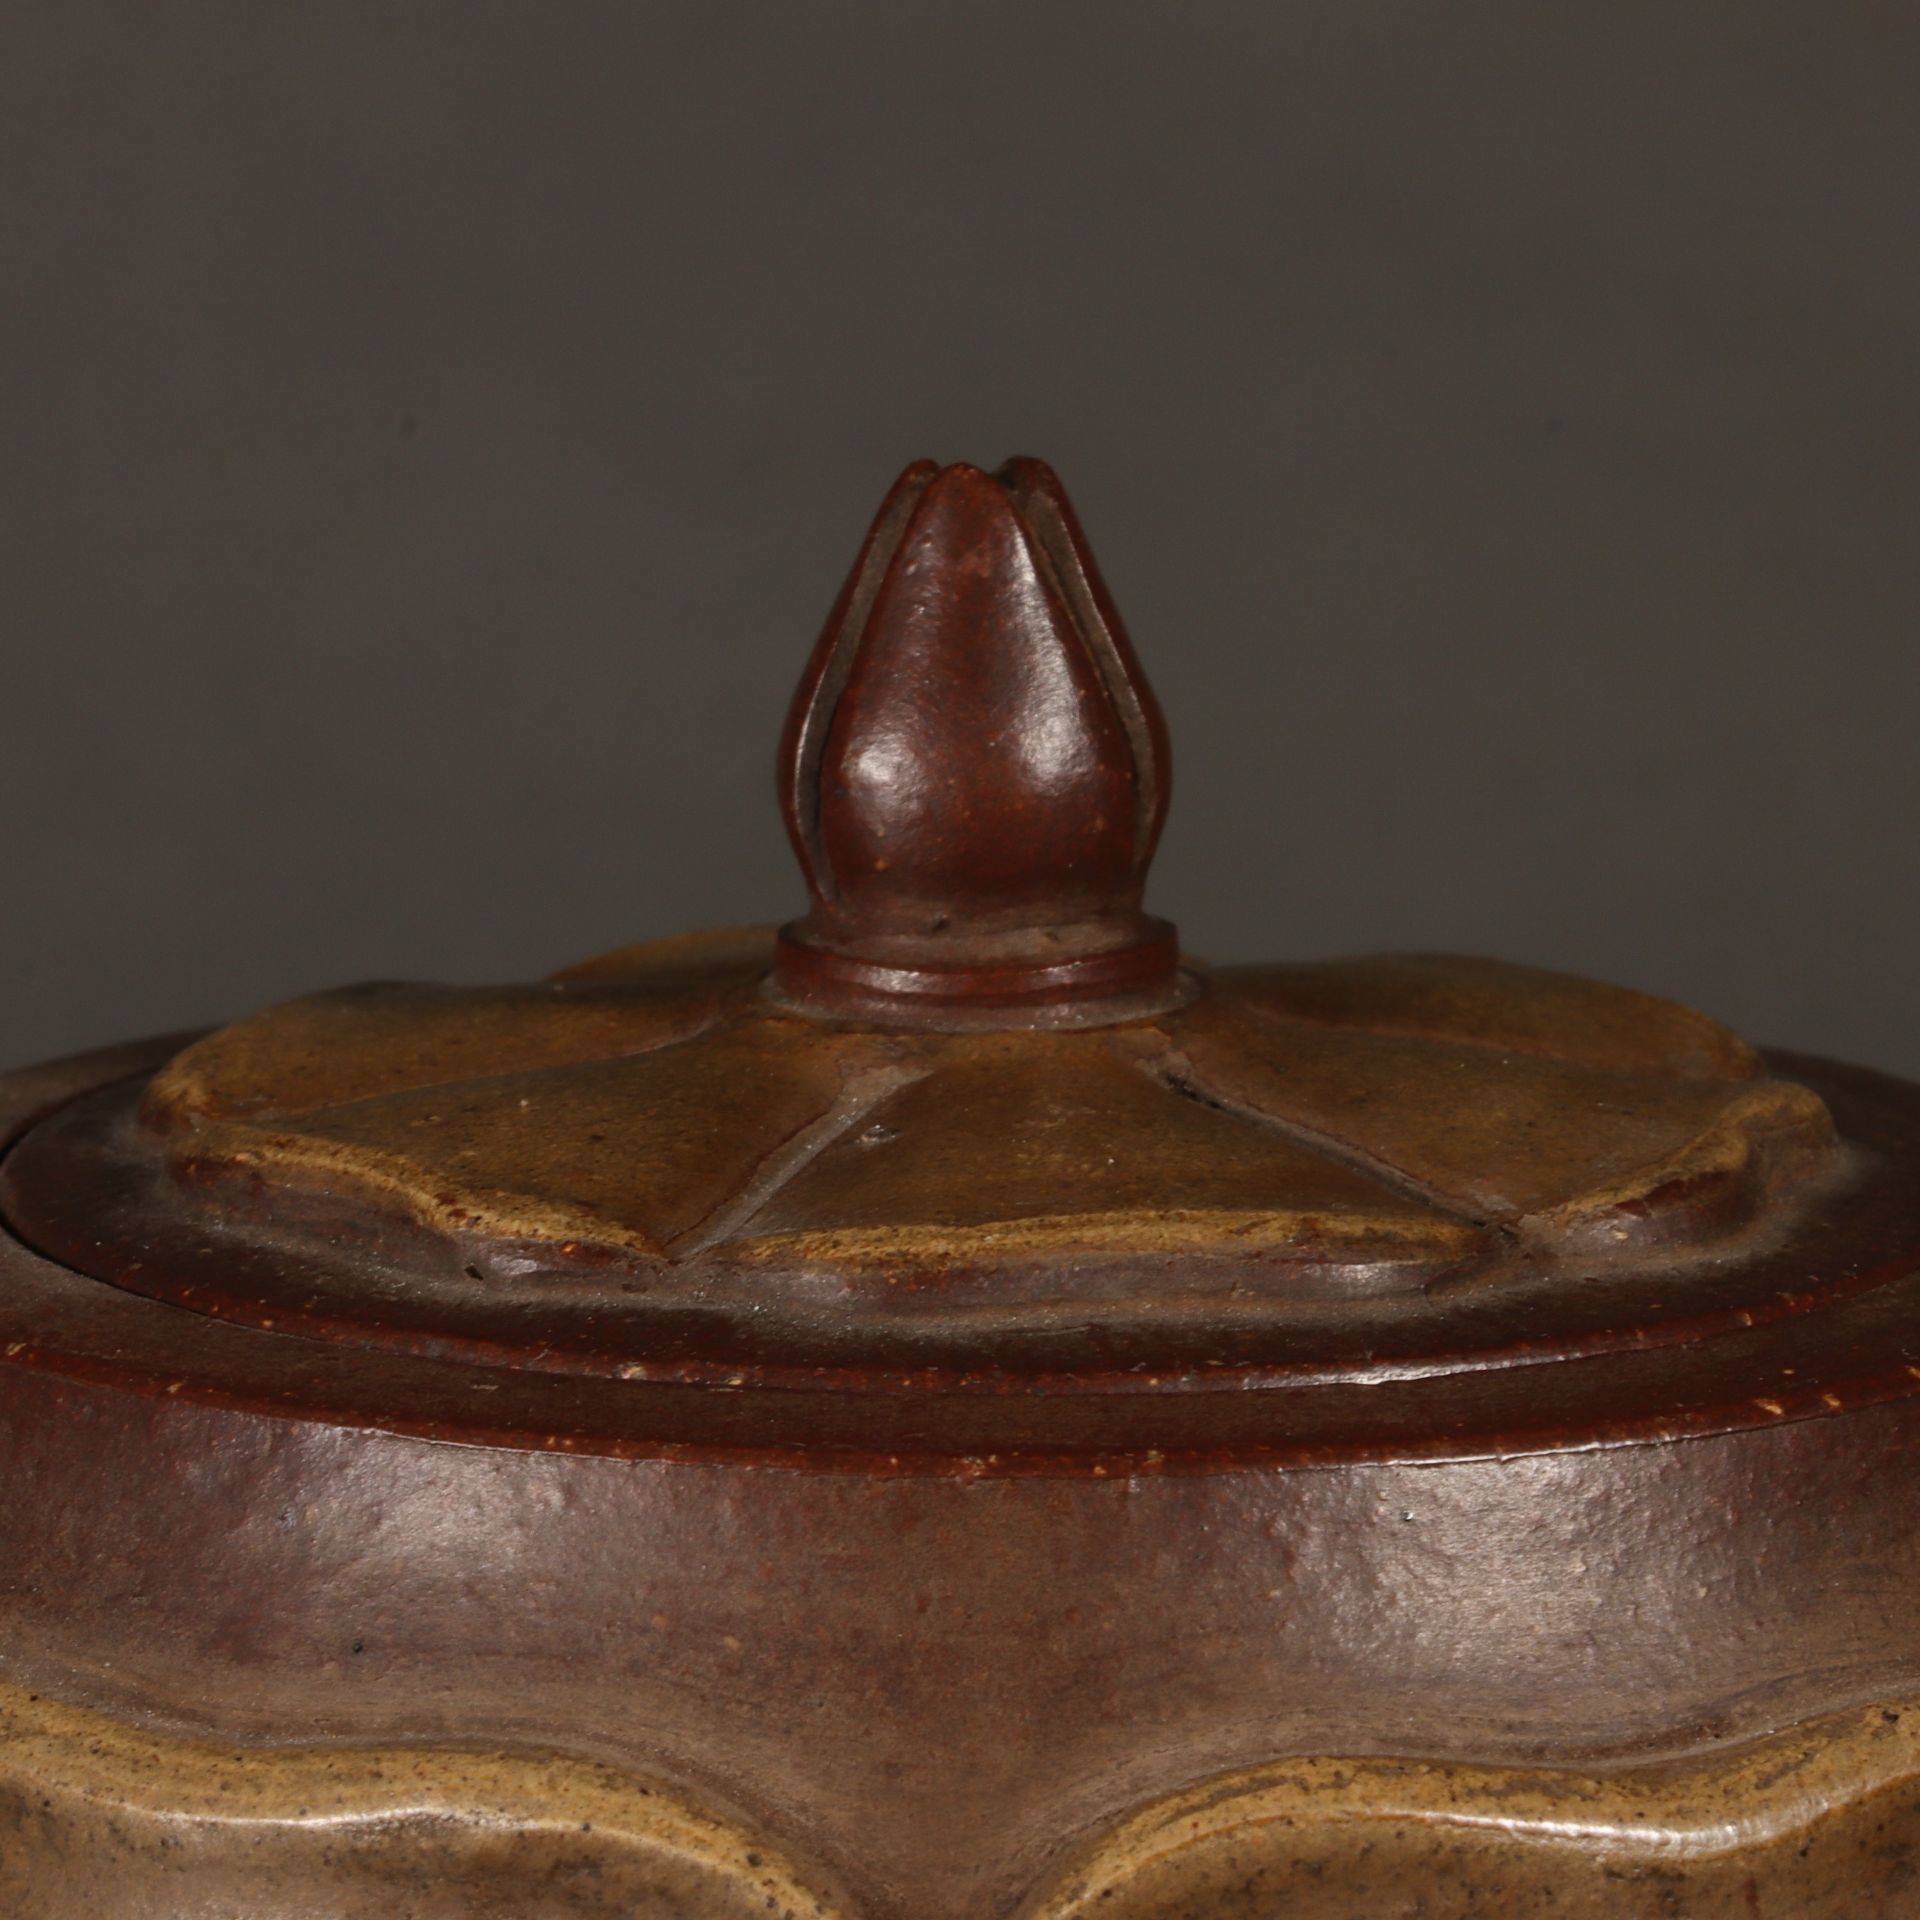 Purple clay pot from the Qing Dynasty - Image 3 of 9